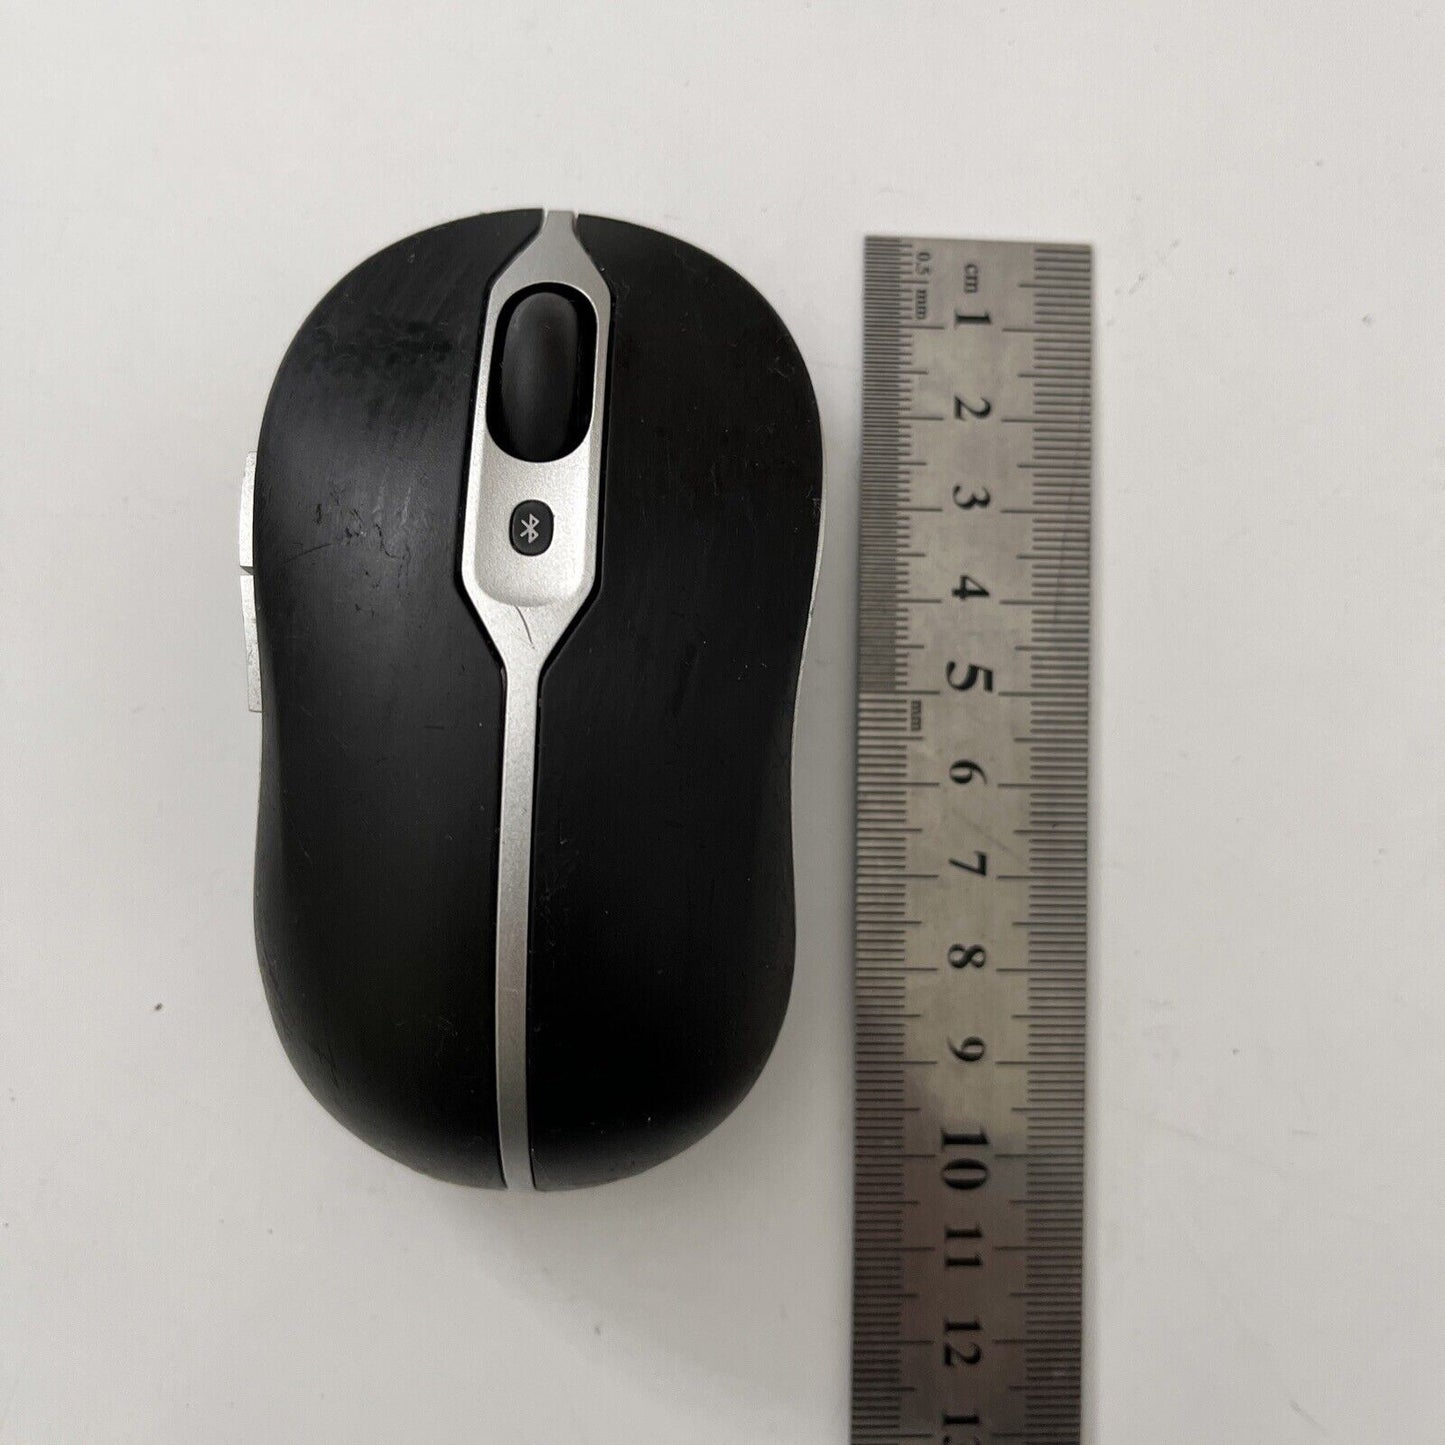 Dell Bluetooth Travel Mouse PU705 1000 DPI 5-Buttons Optical Mouse